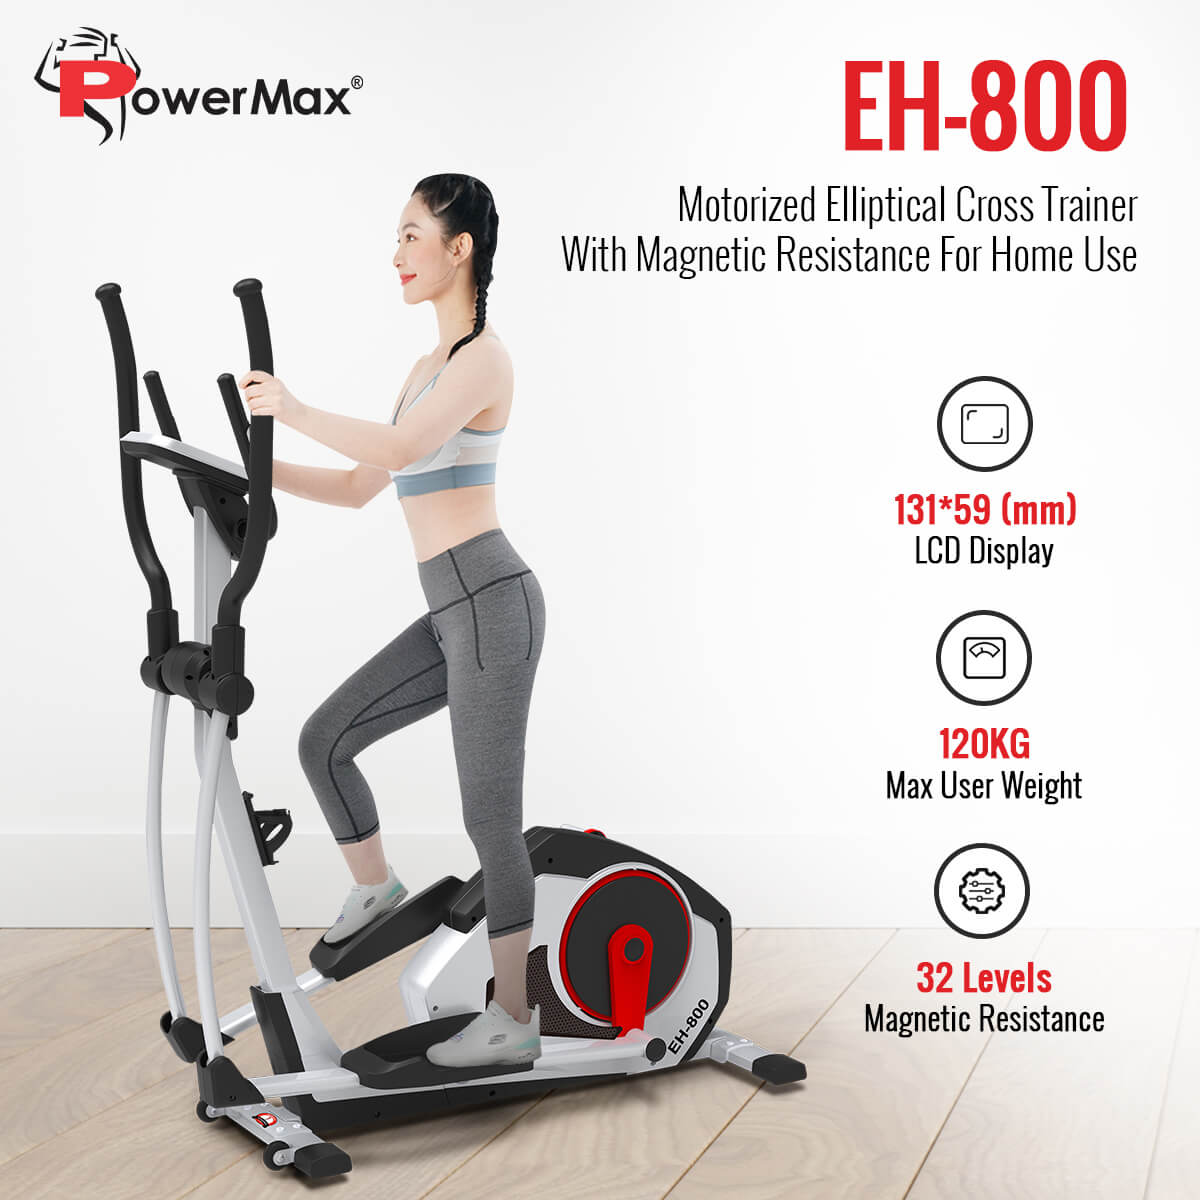 PowerMax Fitness EH-800 Motorized Electric Elliptical Cross Trainer with Magnetic Resistance for home use 